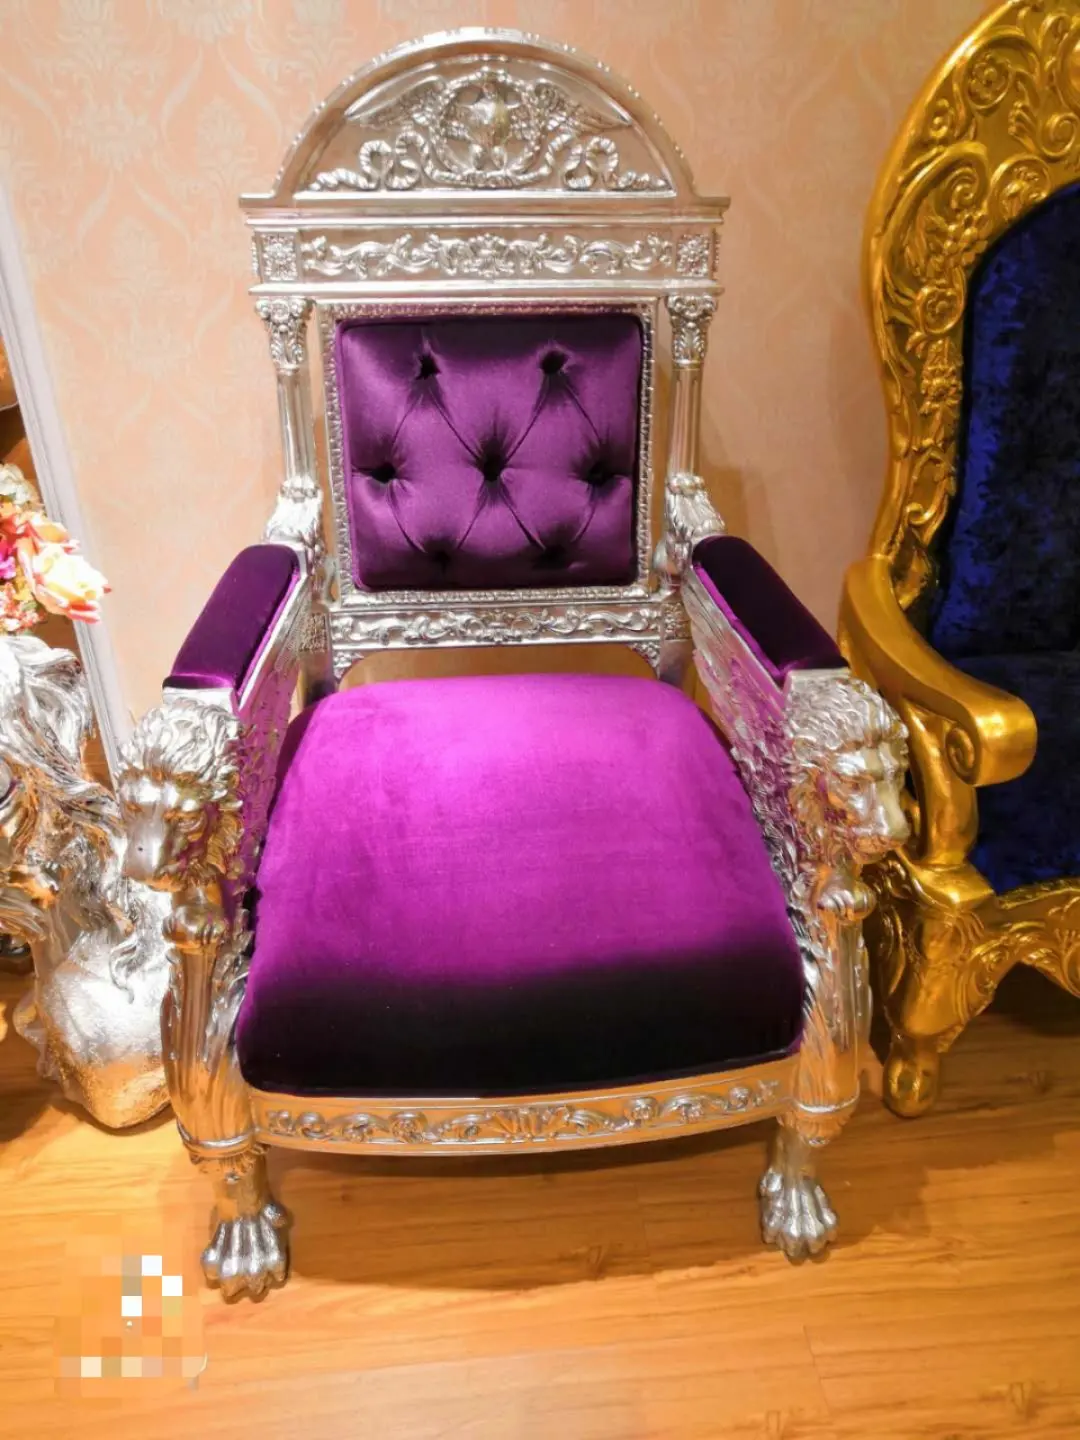 commercial furniture hotel chair italian classical gold or silver king throne wedding chair